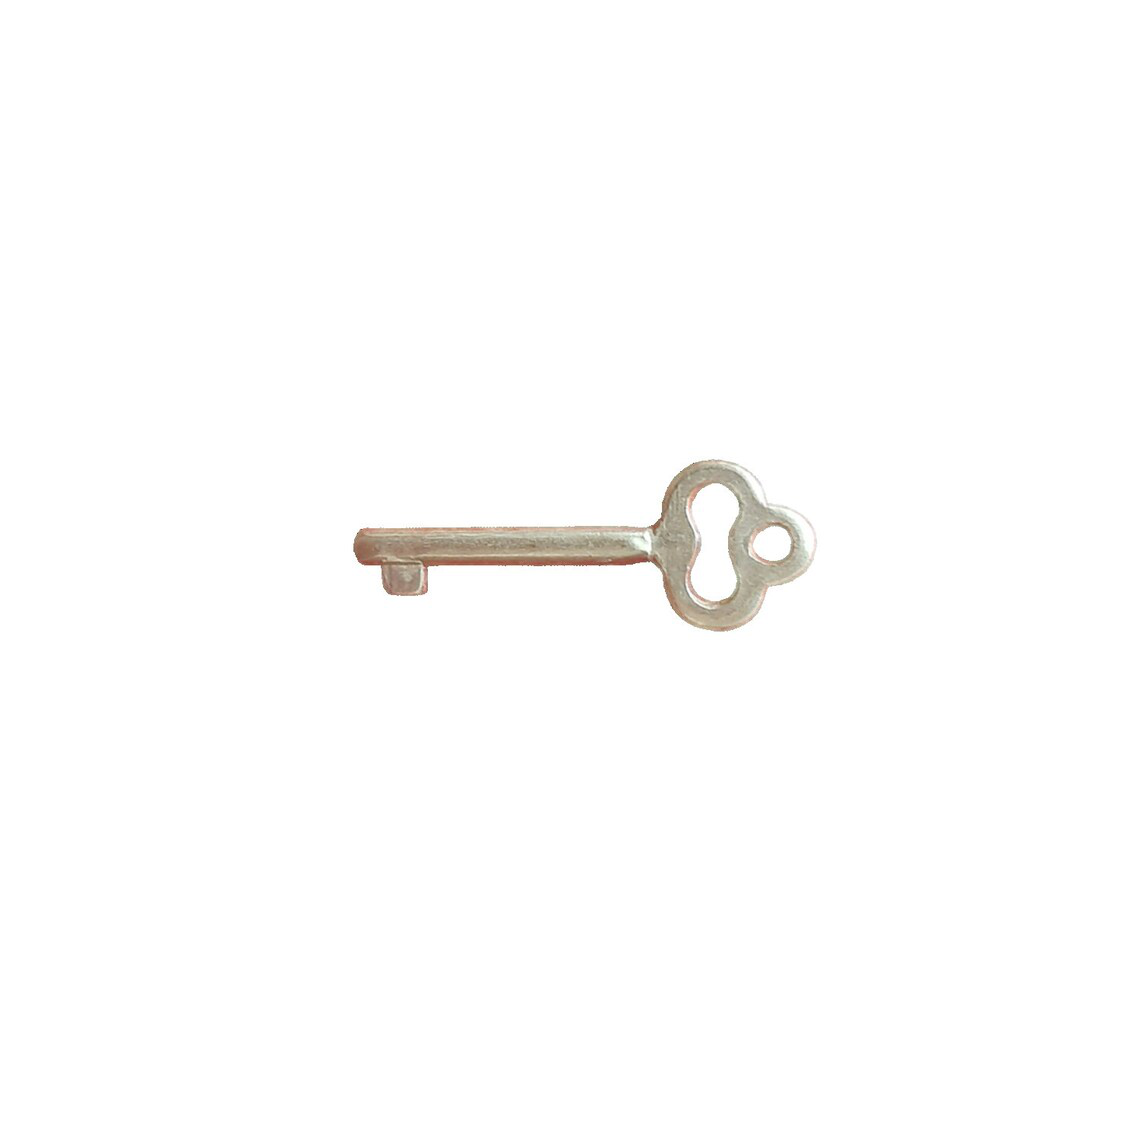 Spare key for our lockable boxes